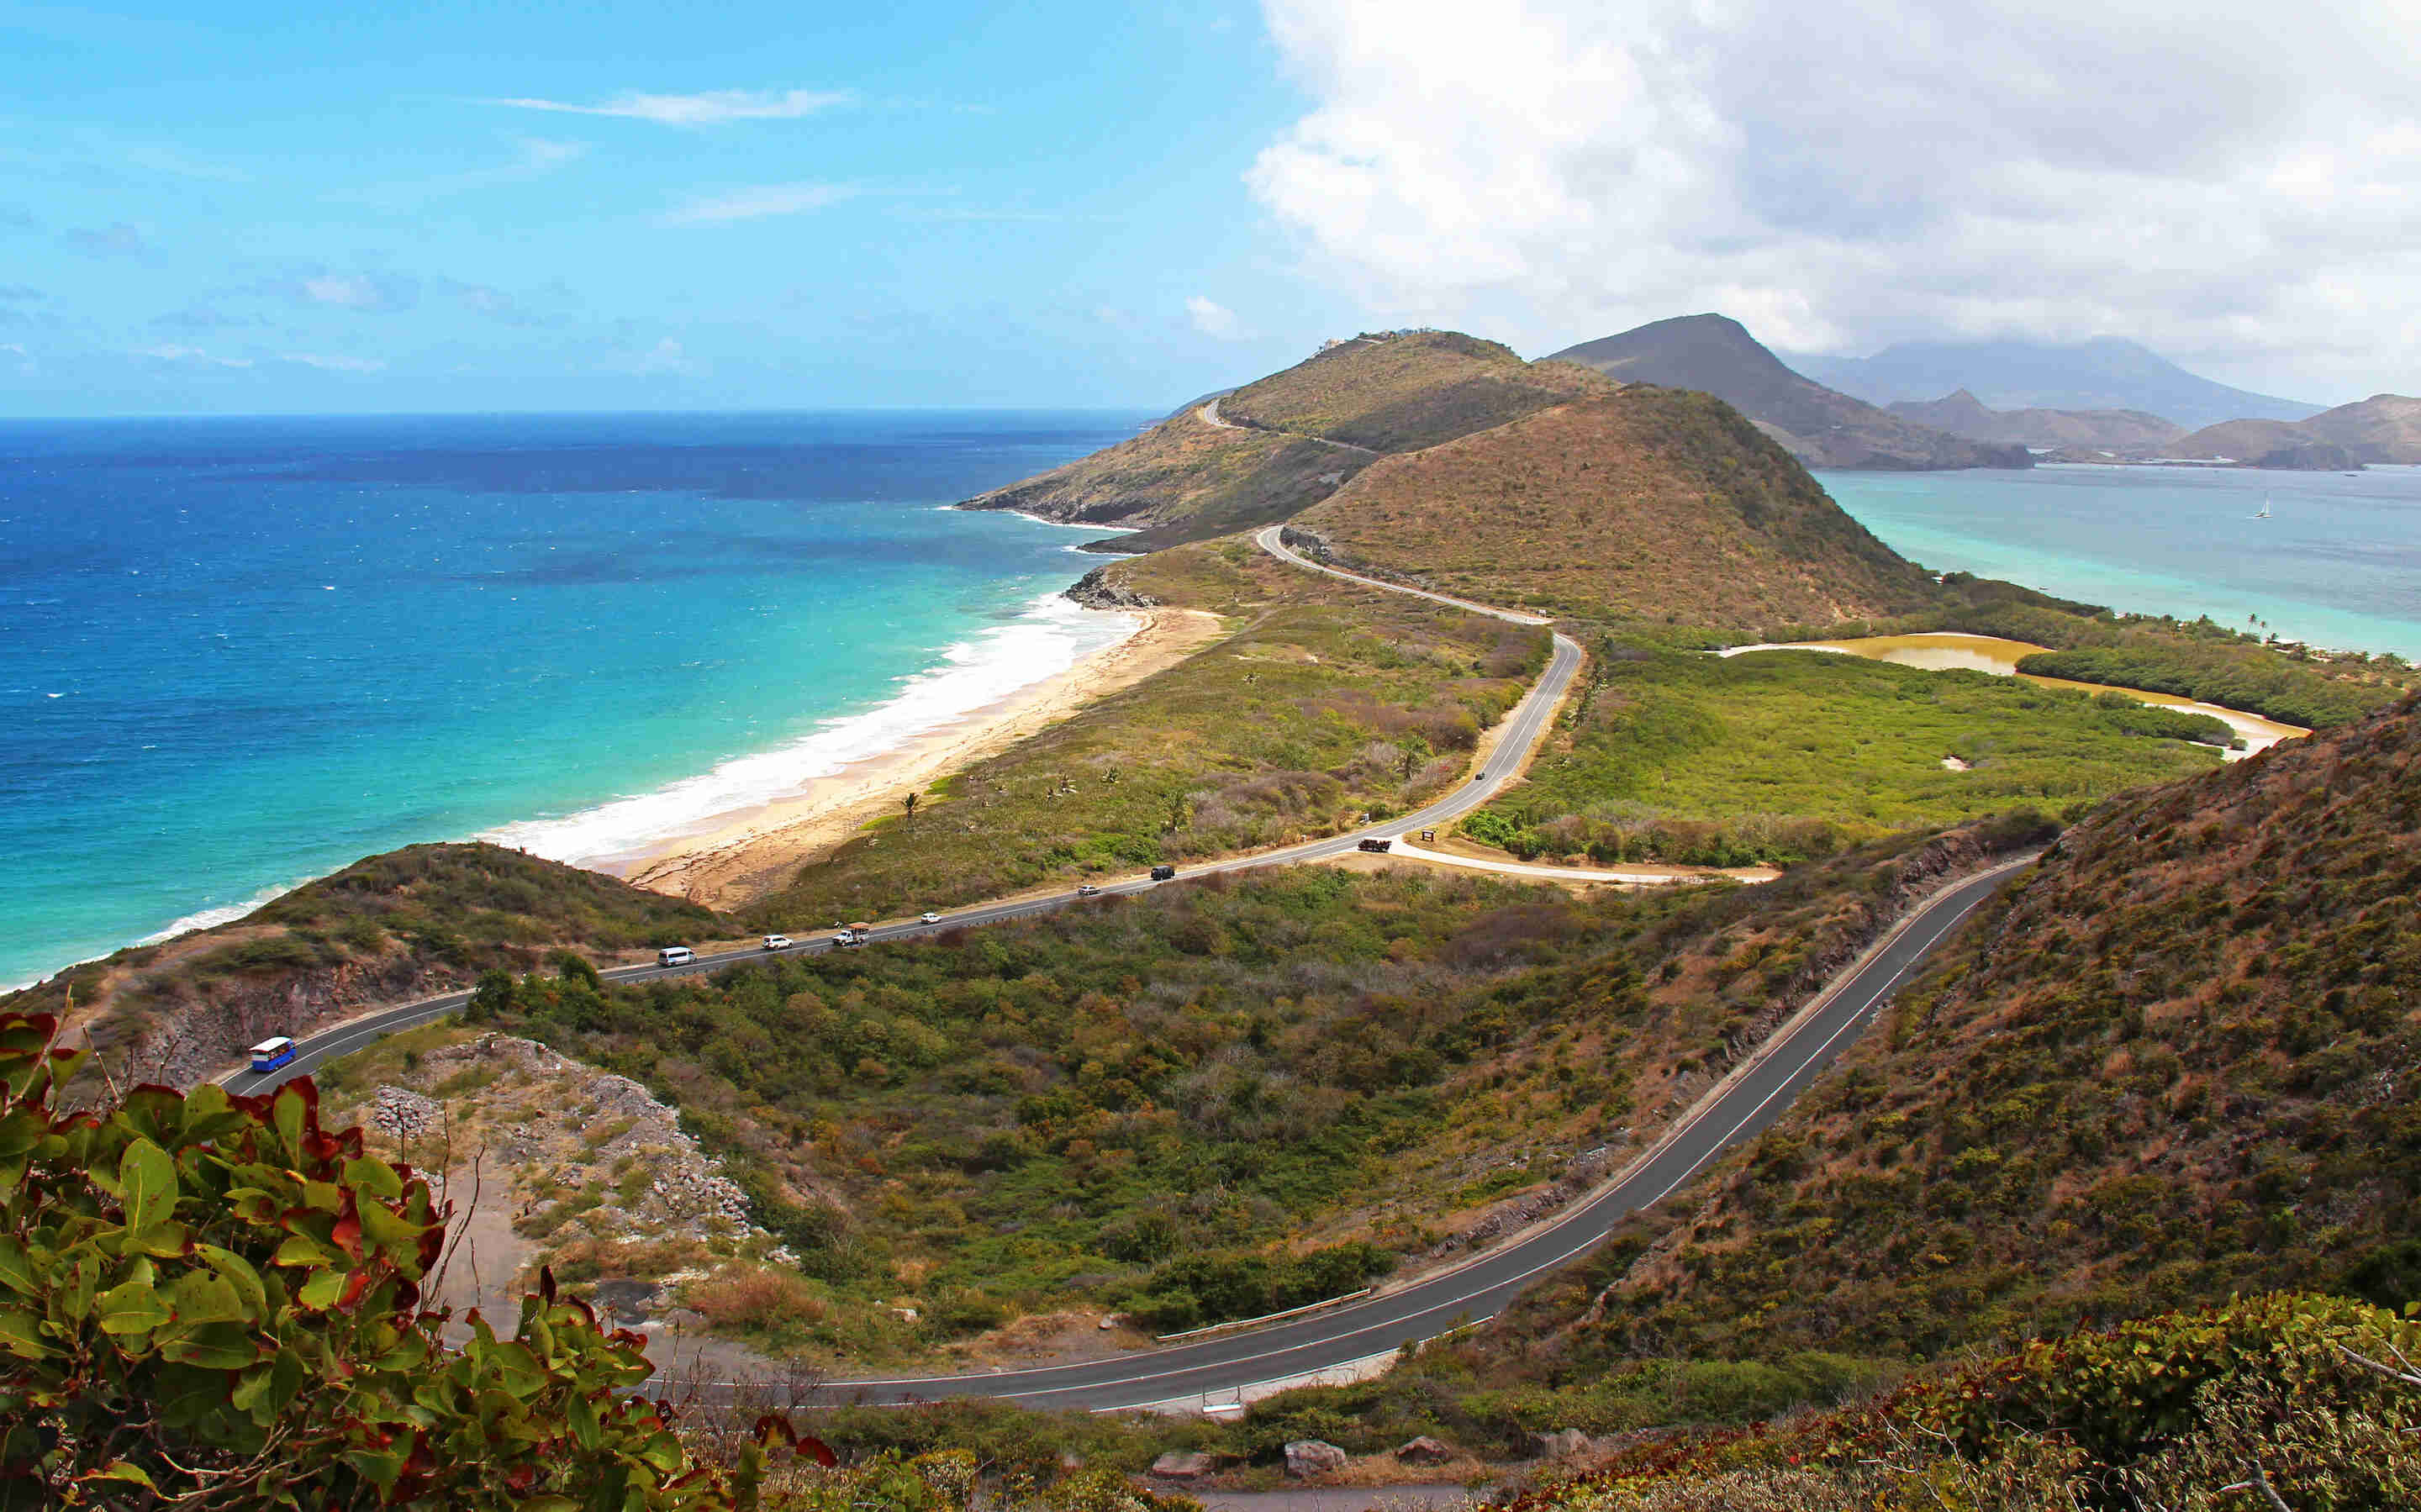 st-kitts-cruise-port-guide-things-to-do-shore-excursions